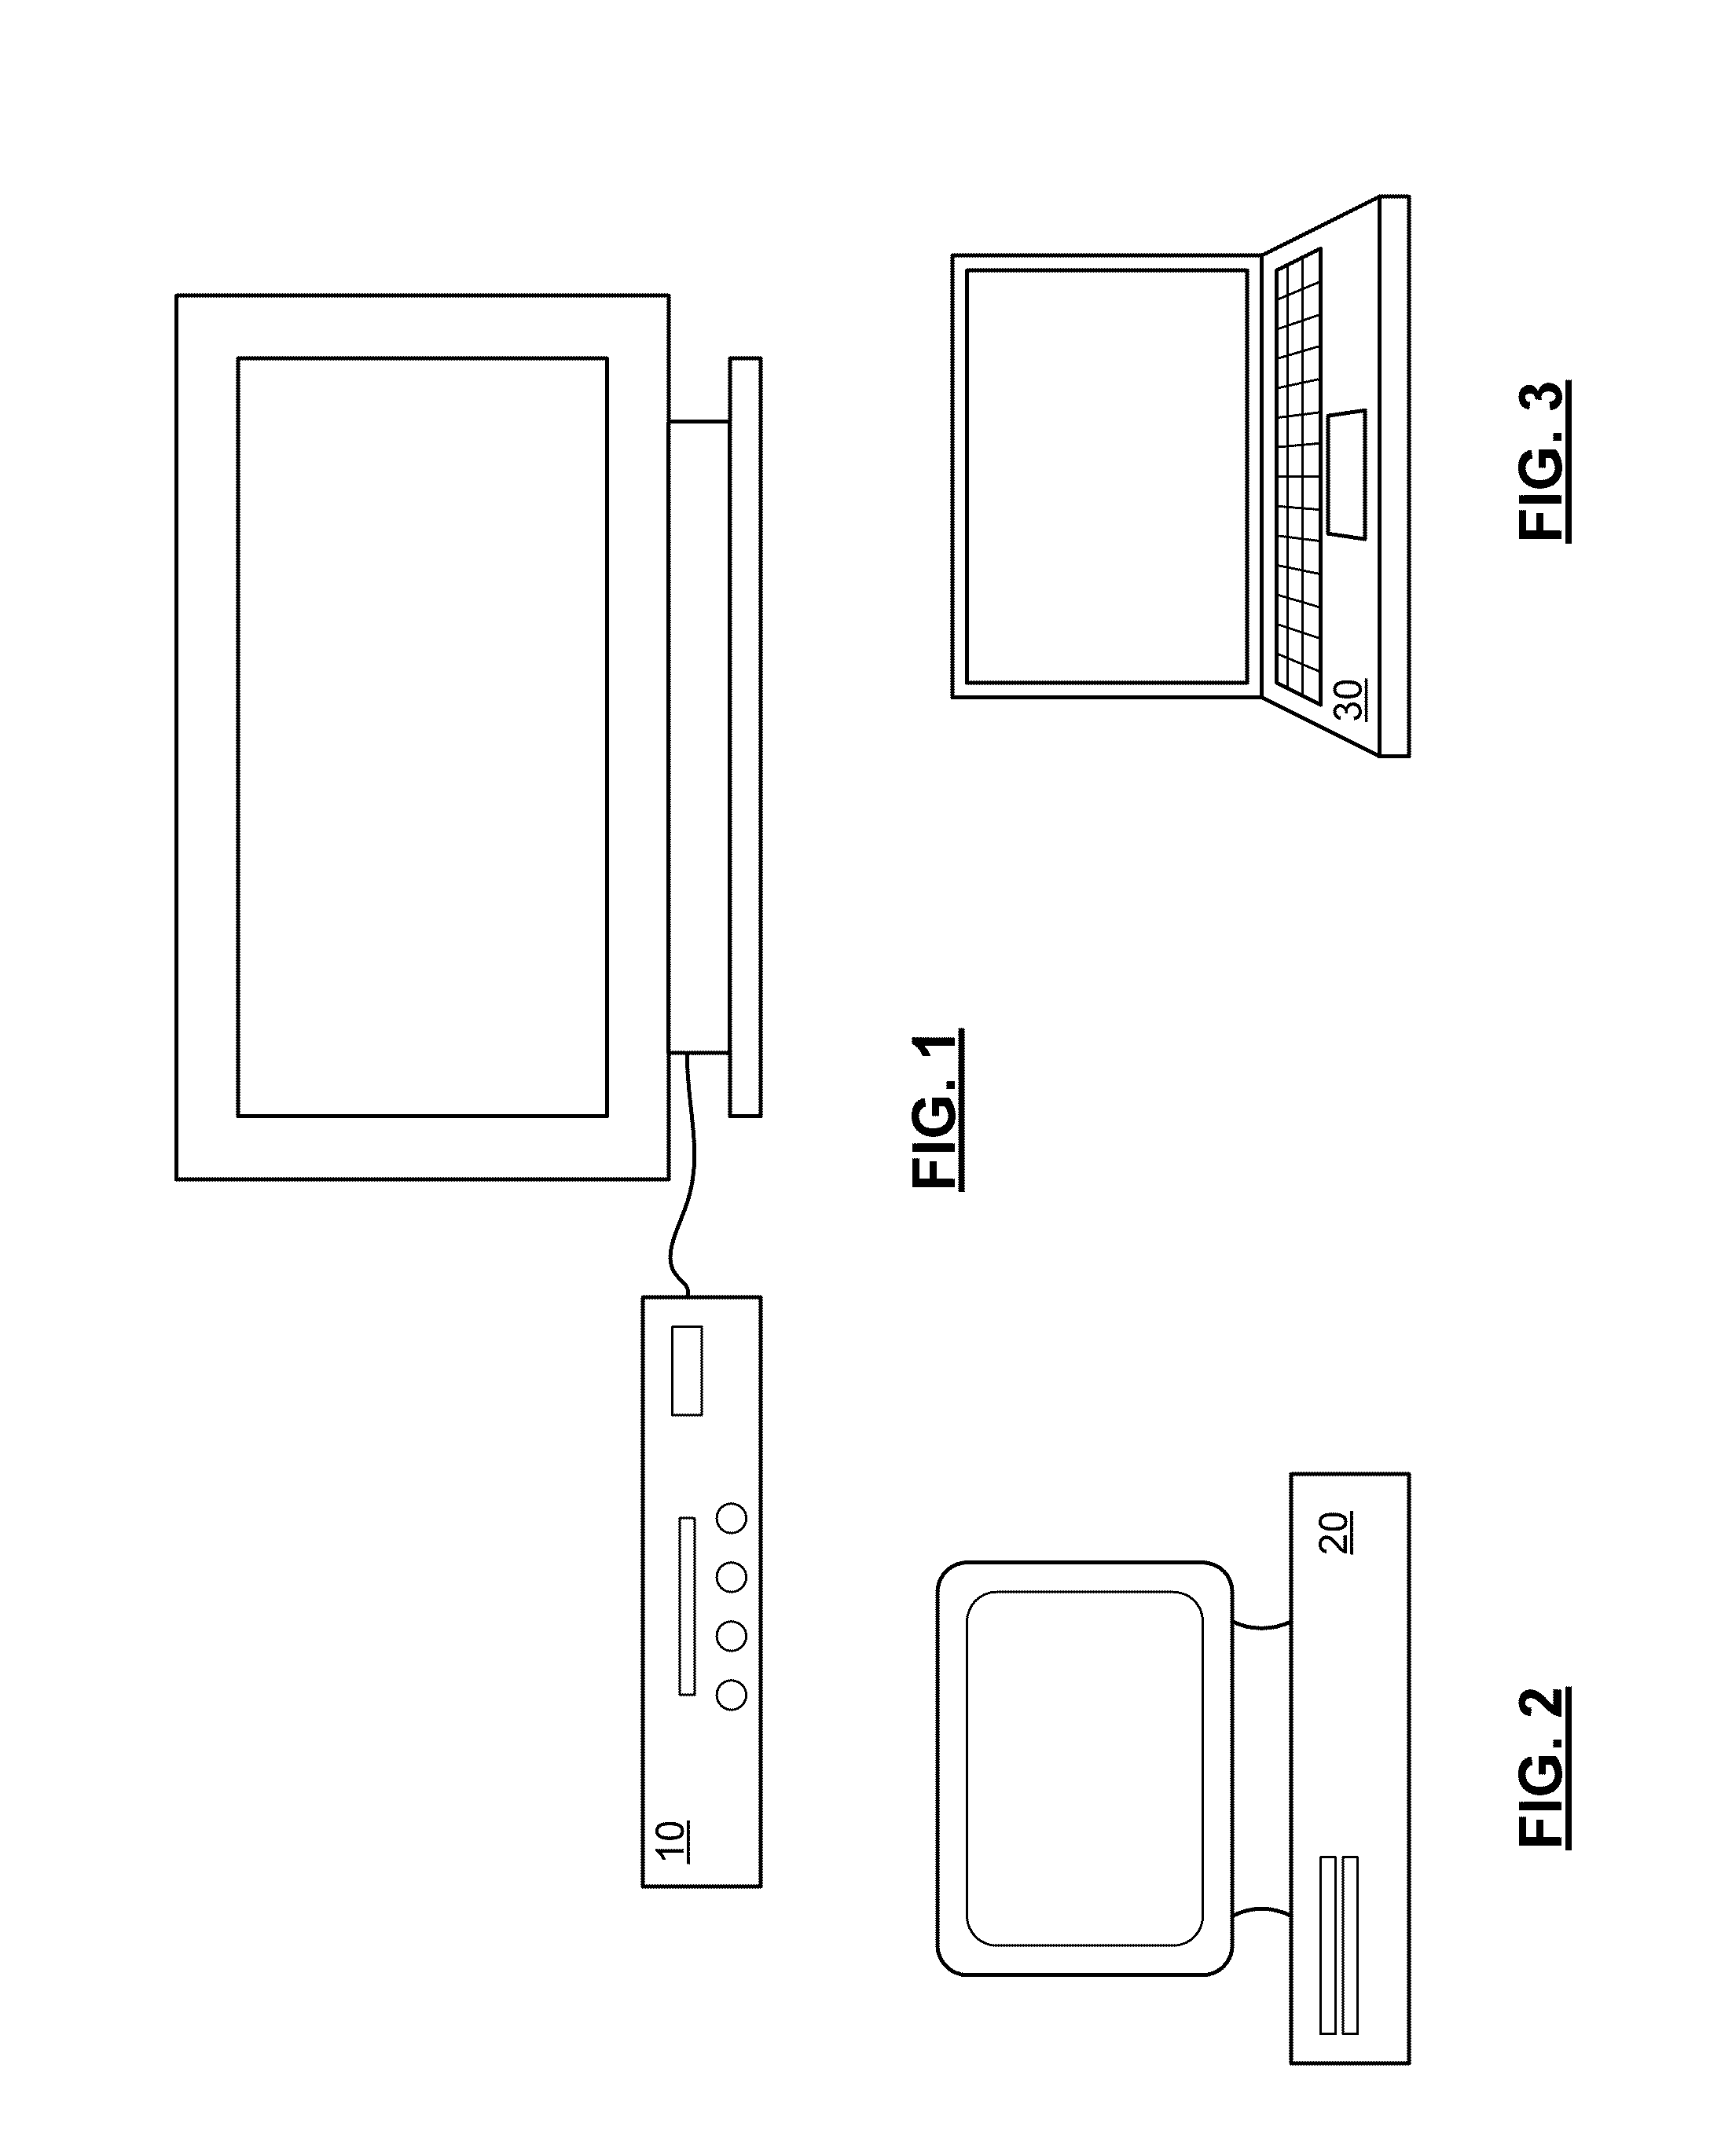 Scaled motion search section with downscaling filter and method for use therewith